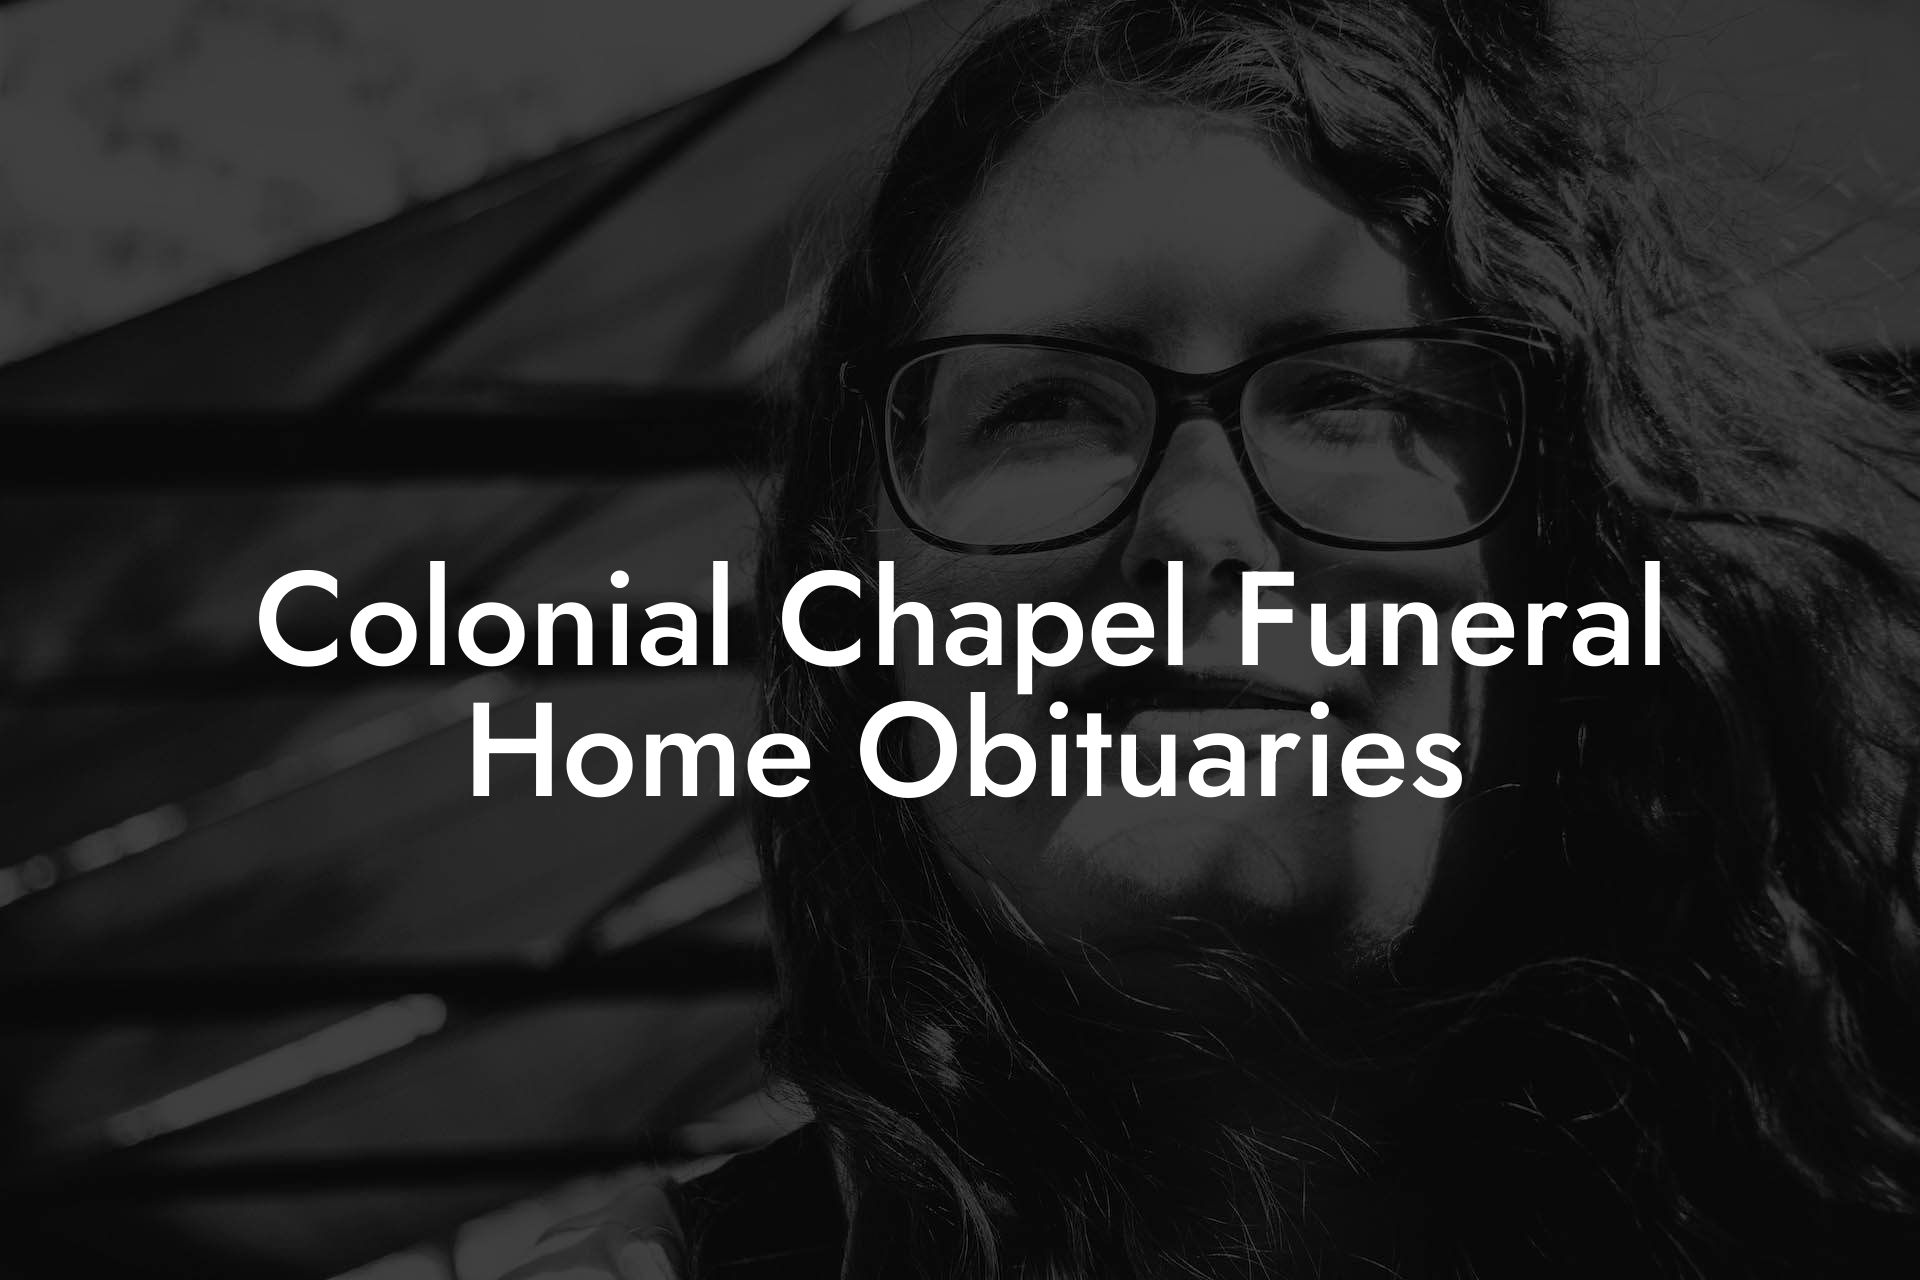 Colonial Chapel Funeral Home Obituaries - Eulogy Assistant